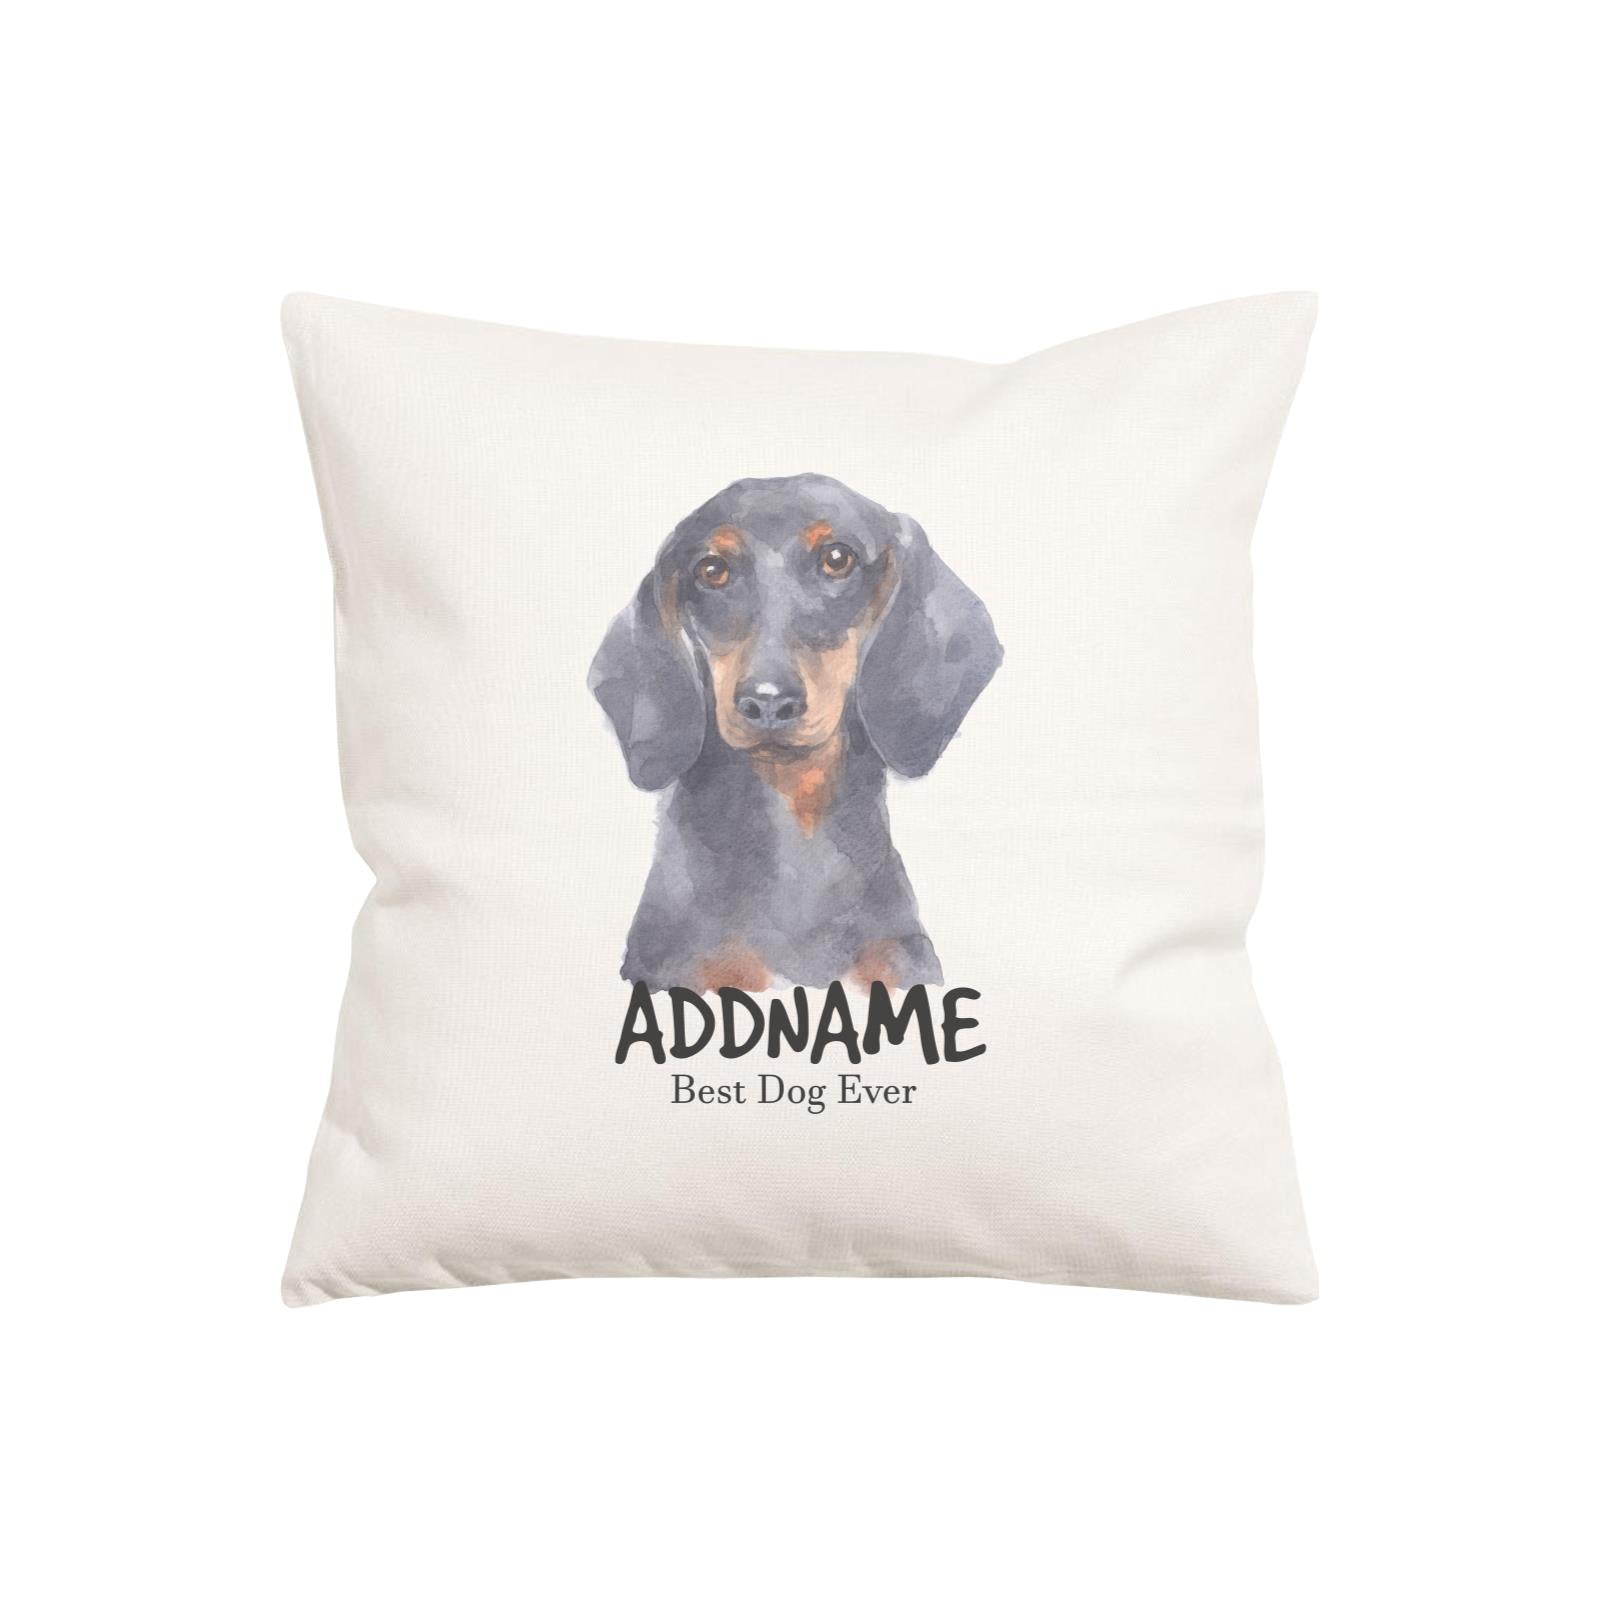 Watercolor Dog Series Dashund Best Dog Ever Addname Pillow Cushion